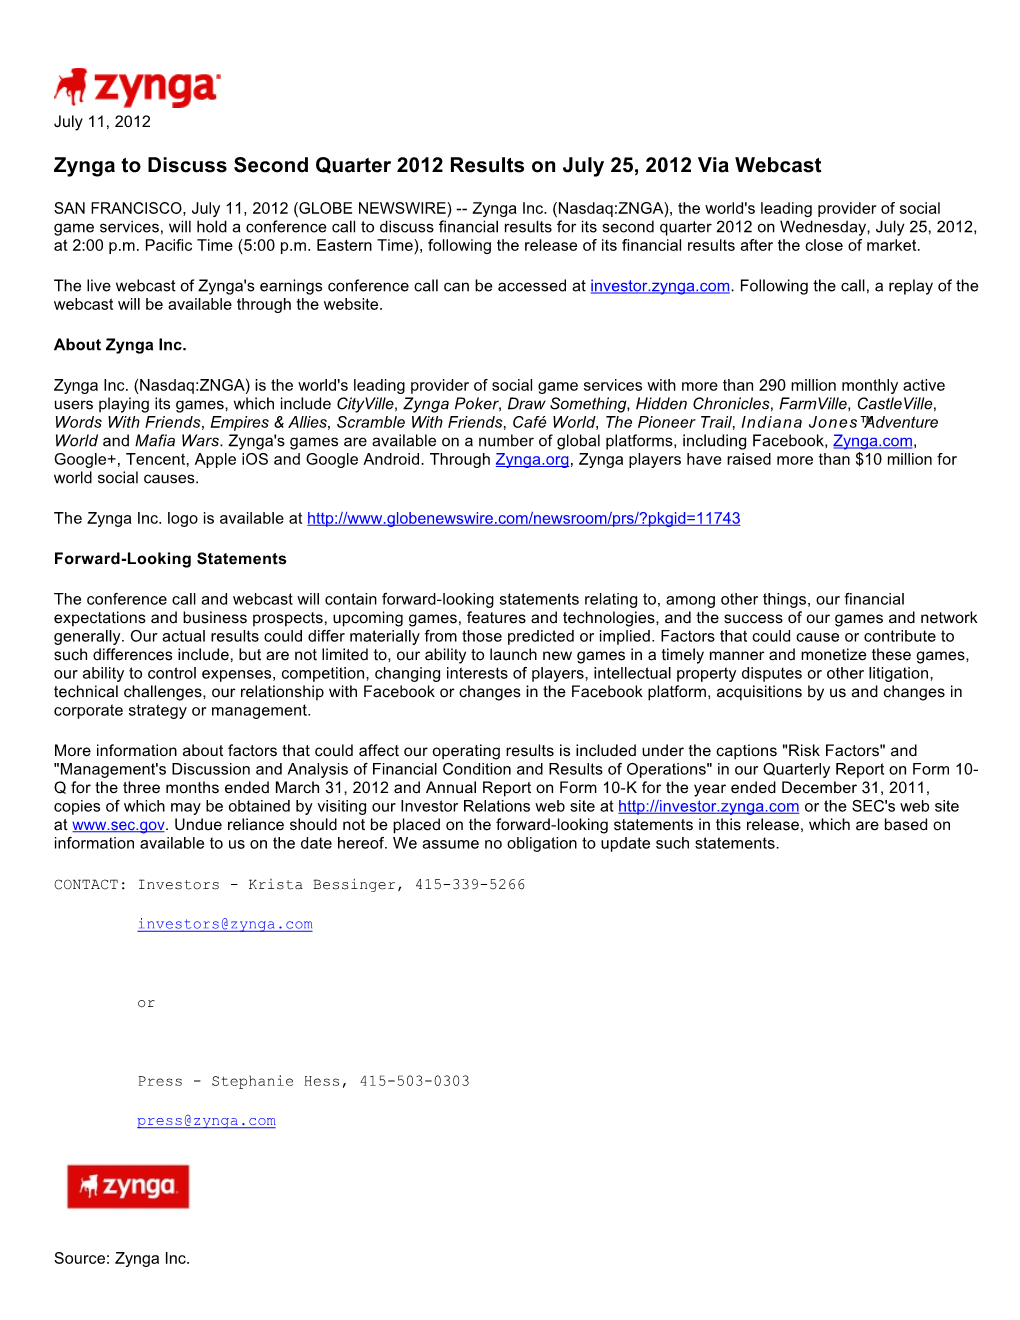 Zynga to Discuss Second Quarter 2012 Results on July 25, 2012 Via Webcast